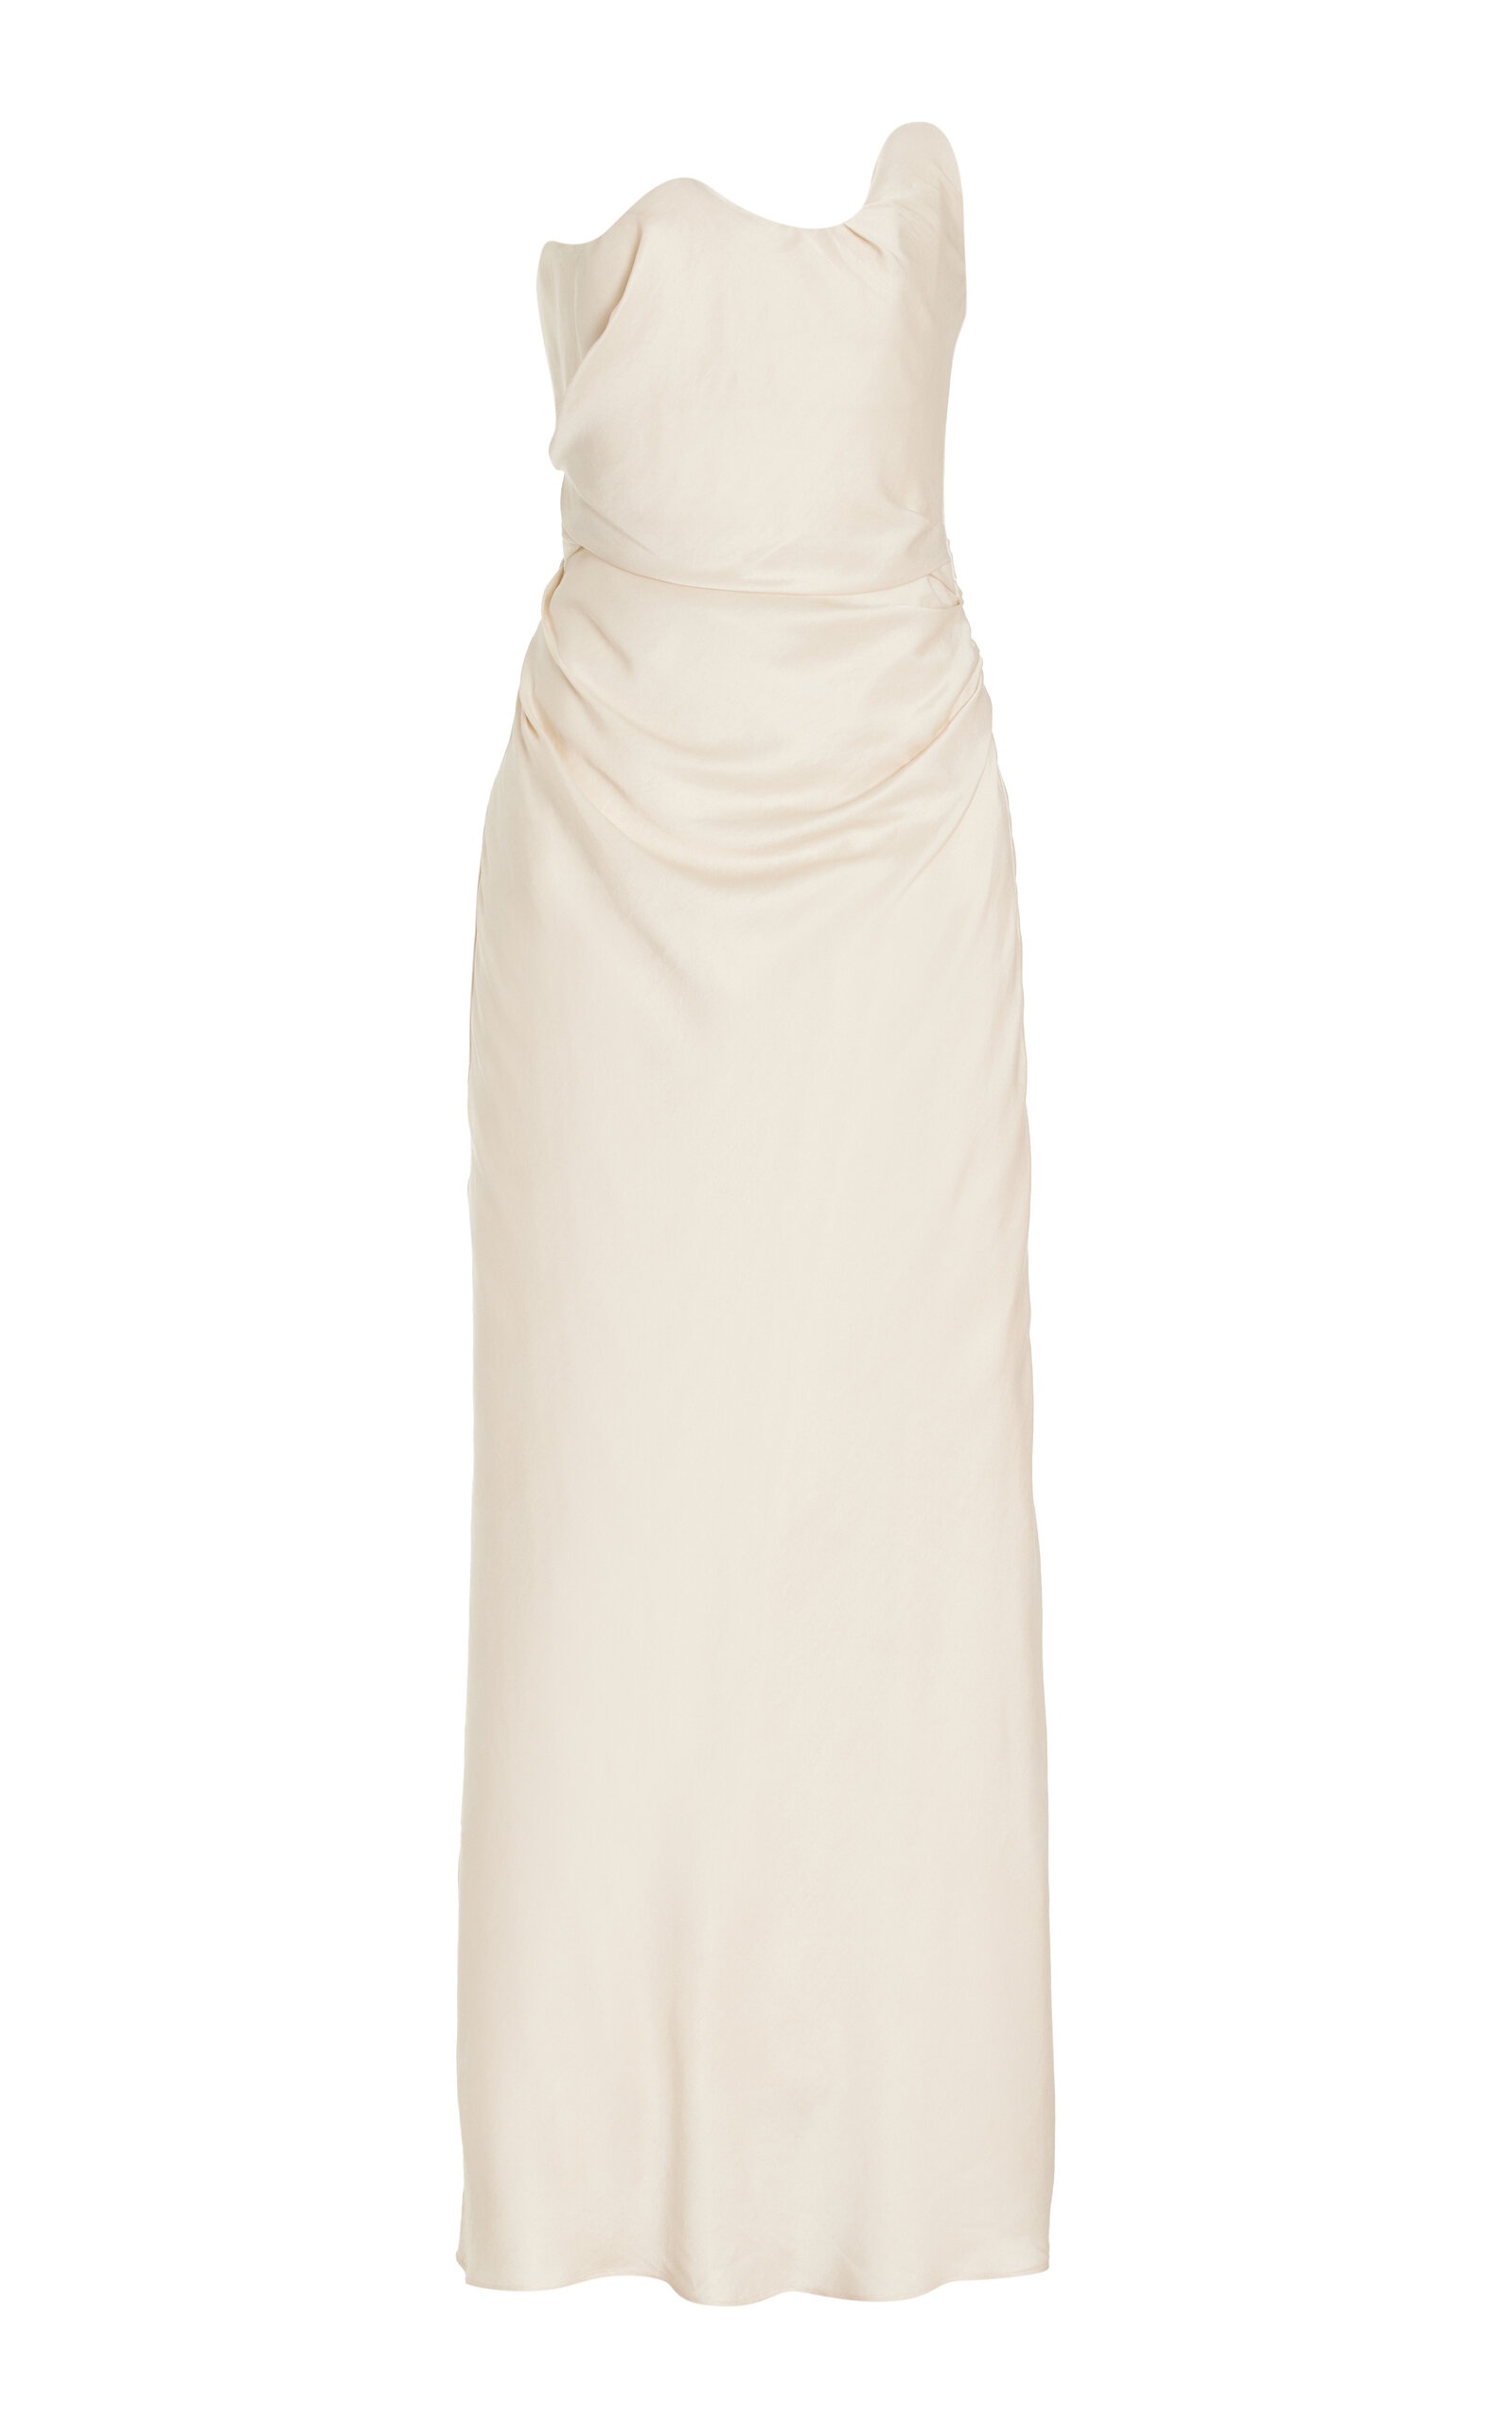 Aries Curved Eco-Satin Maxi Dress ivory - 1